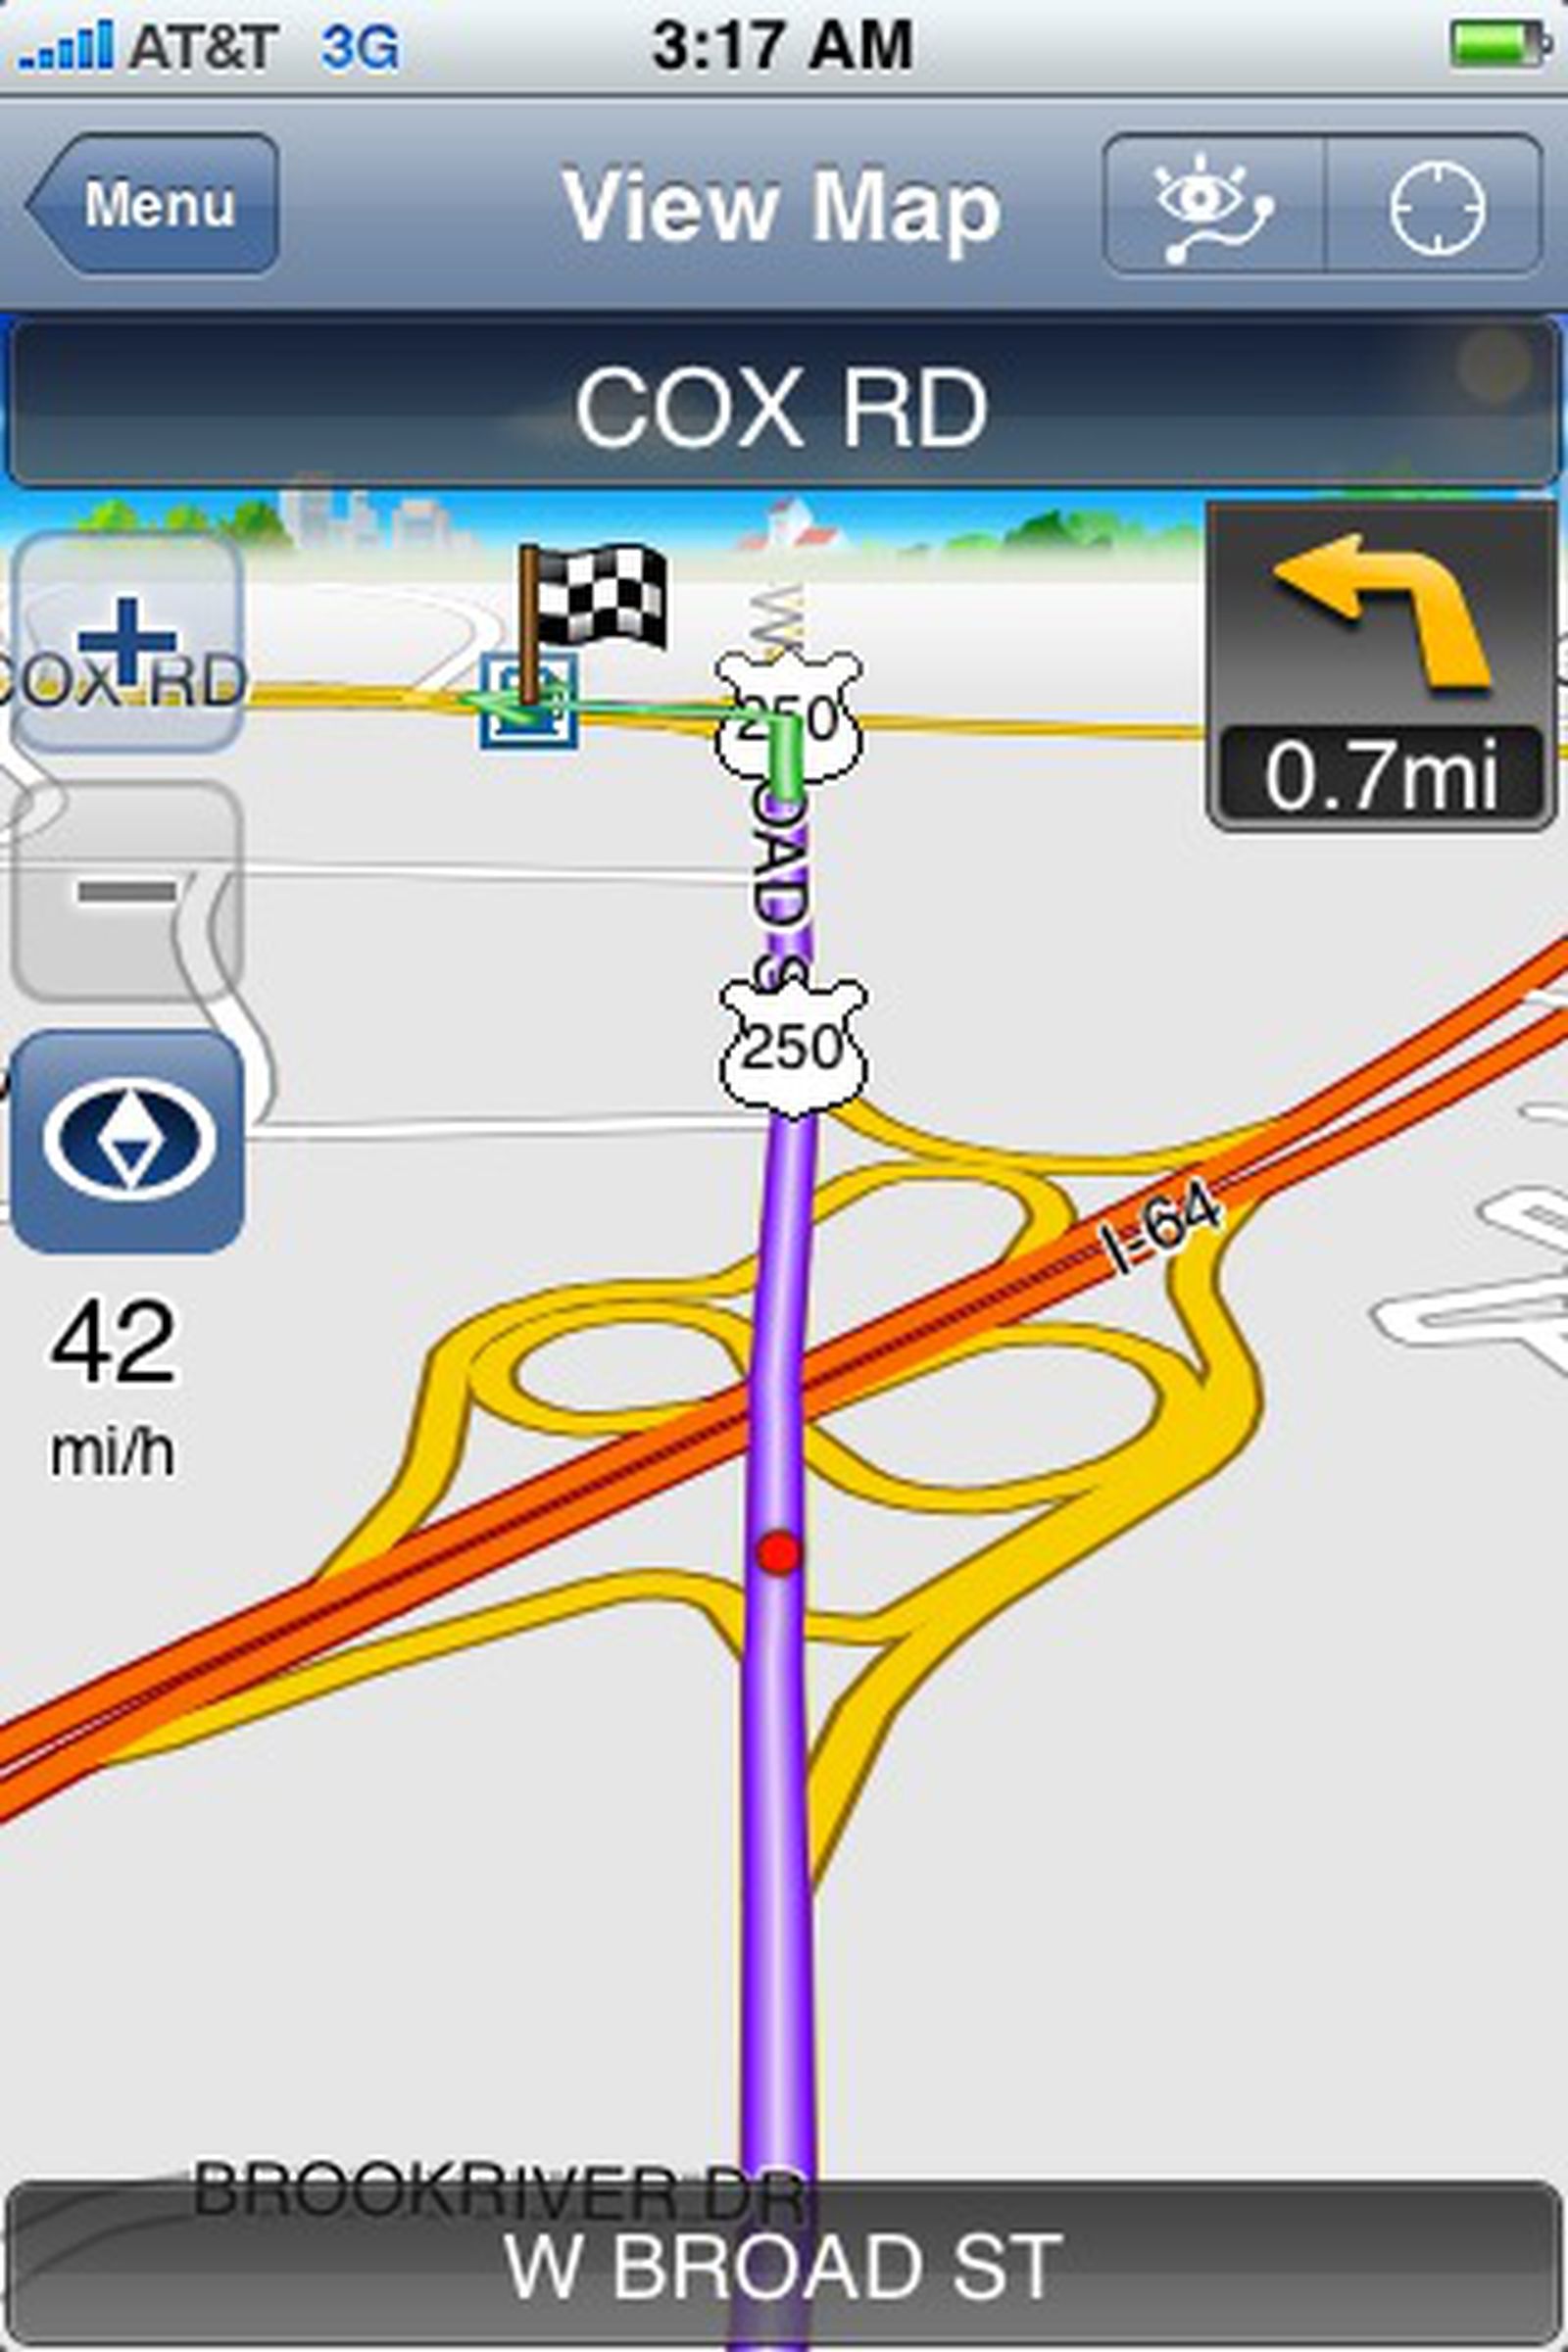 iphone gps tracks even if off